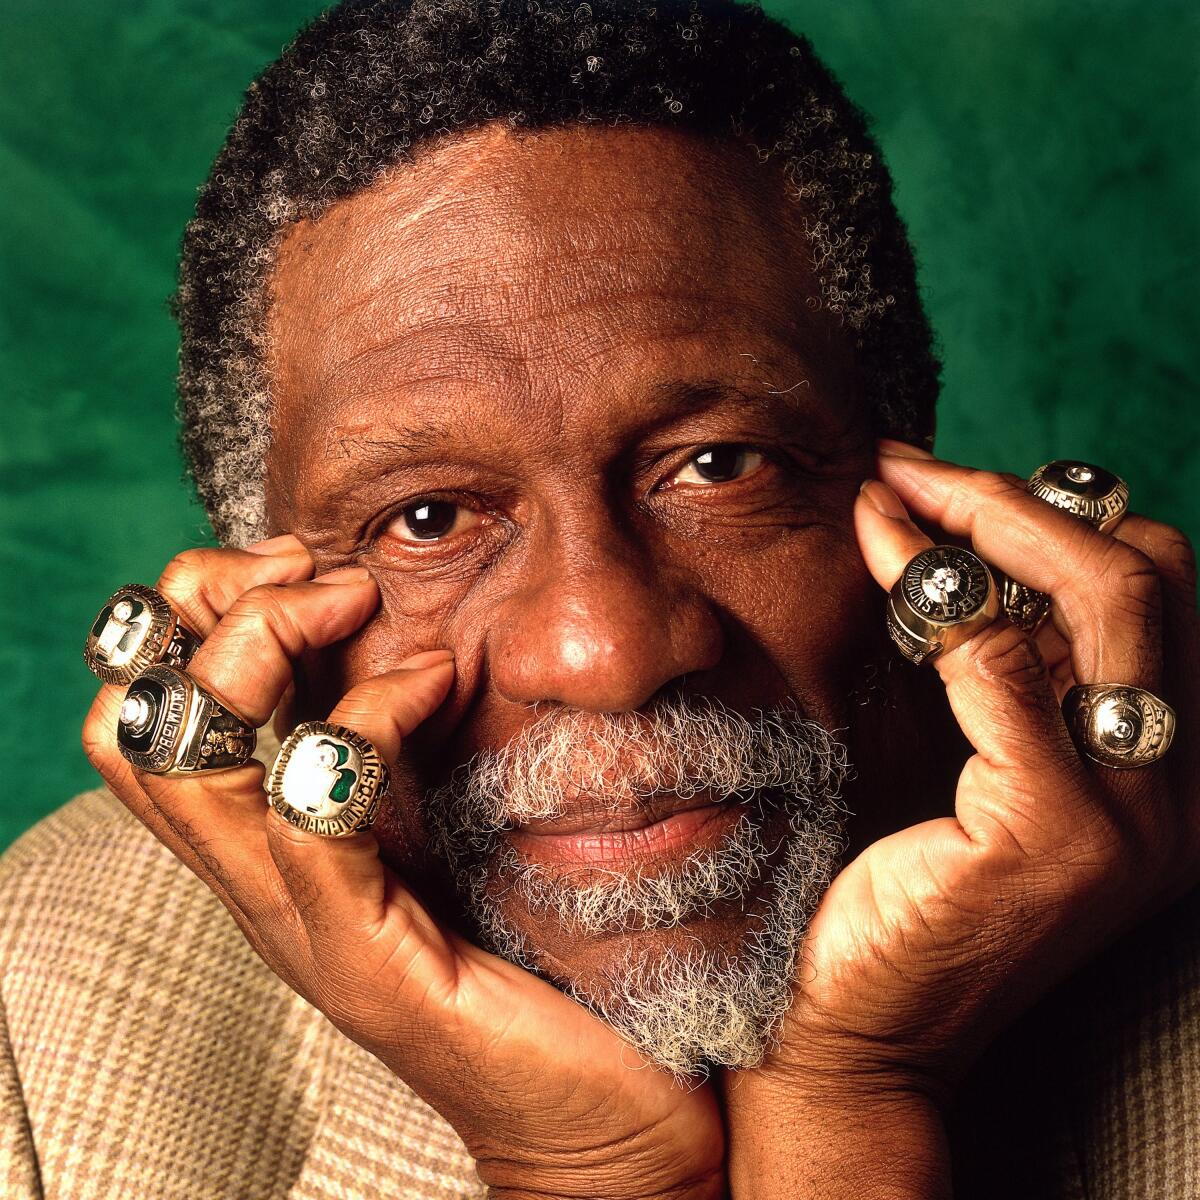 Bill Russell poses for a photo in 1996 with his eleven championship rings.